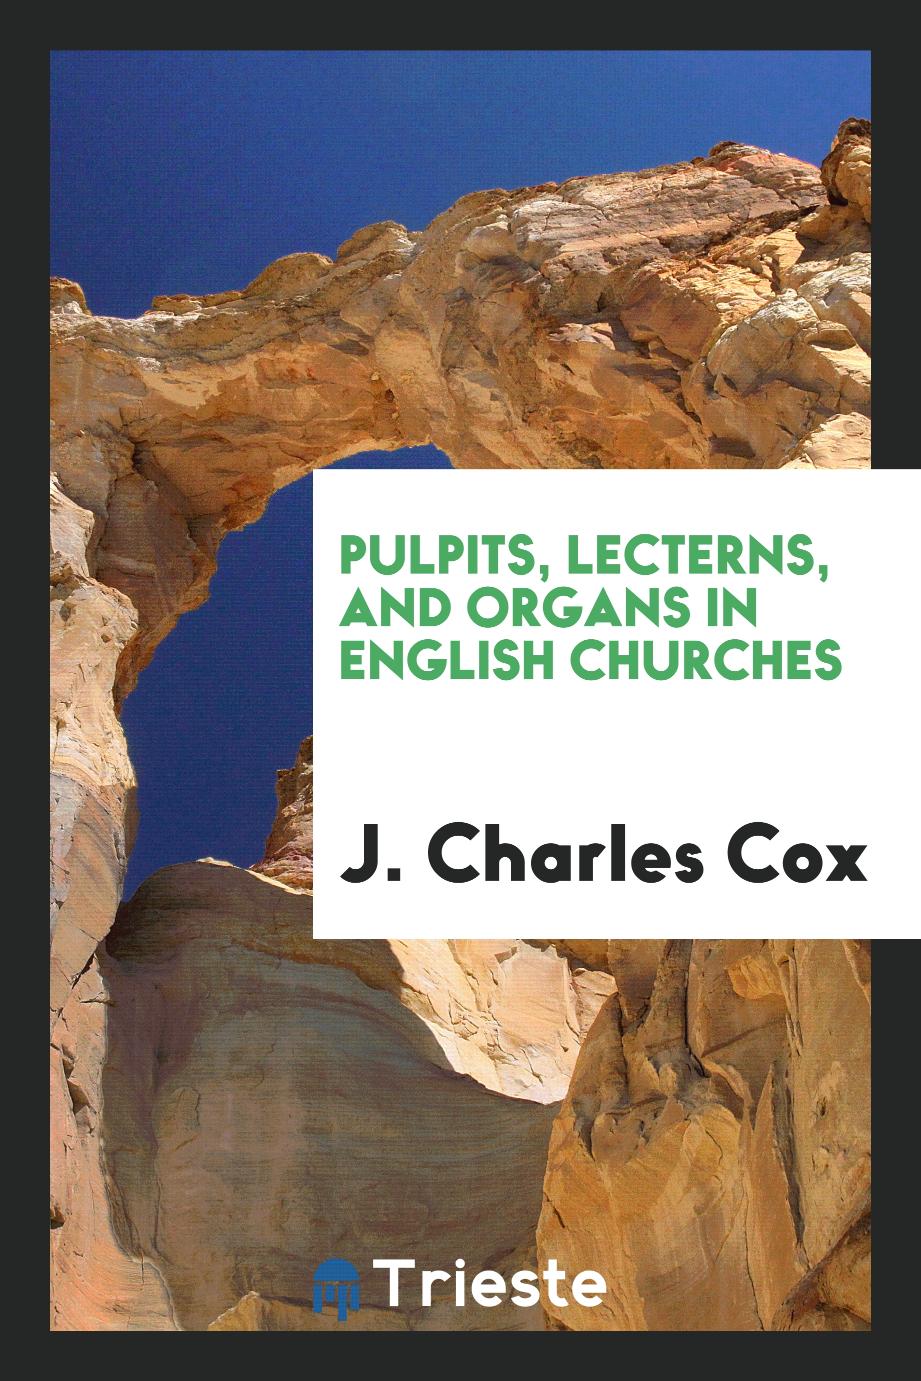 Pulpits, lecterns, and organs in English churches